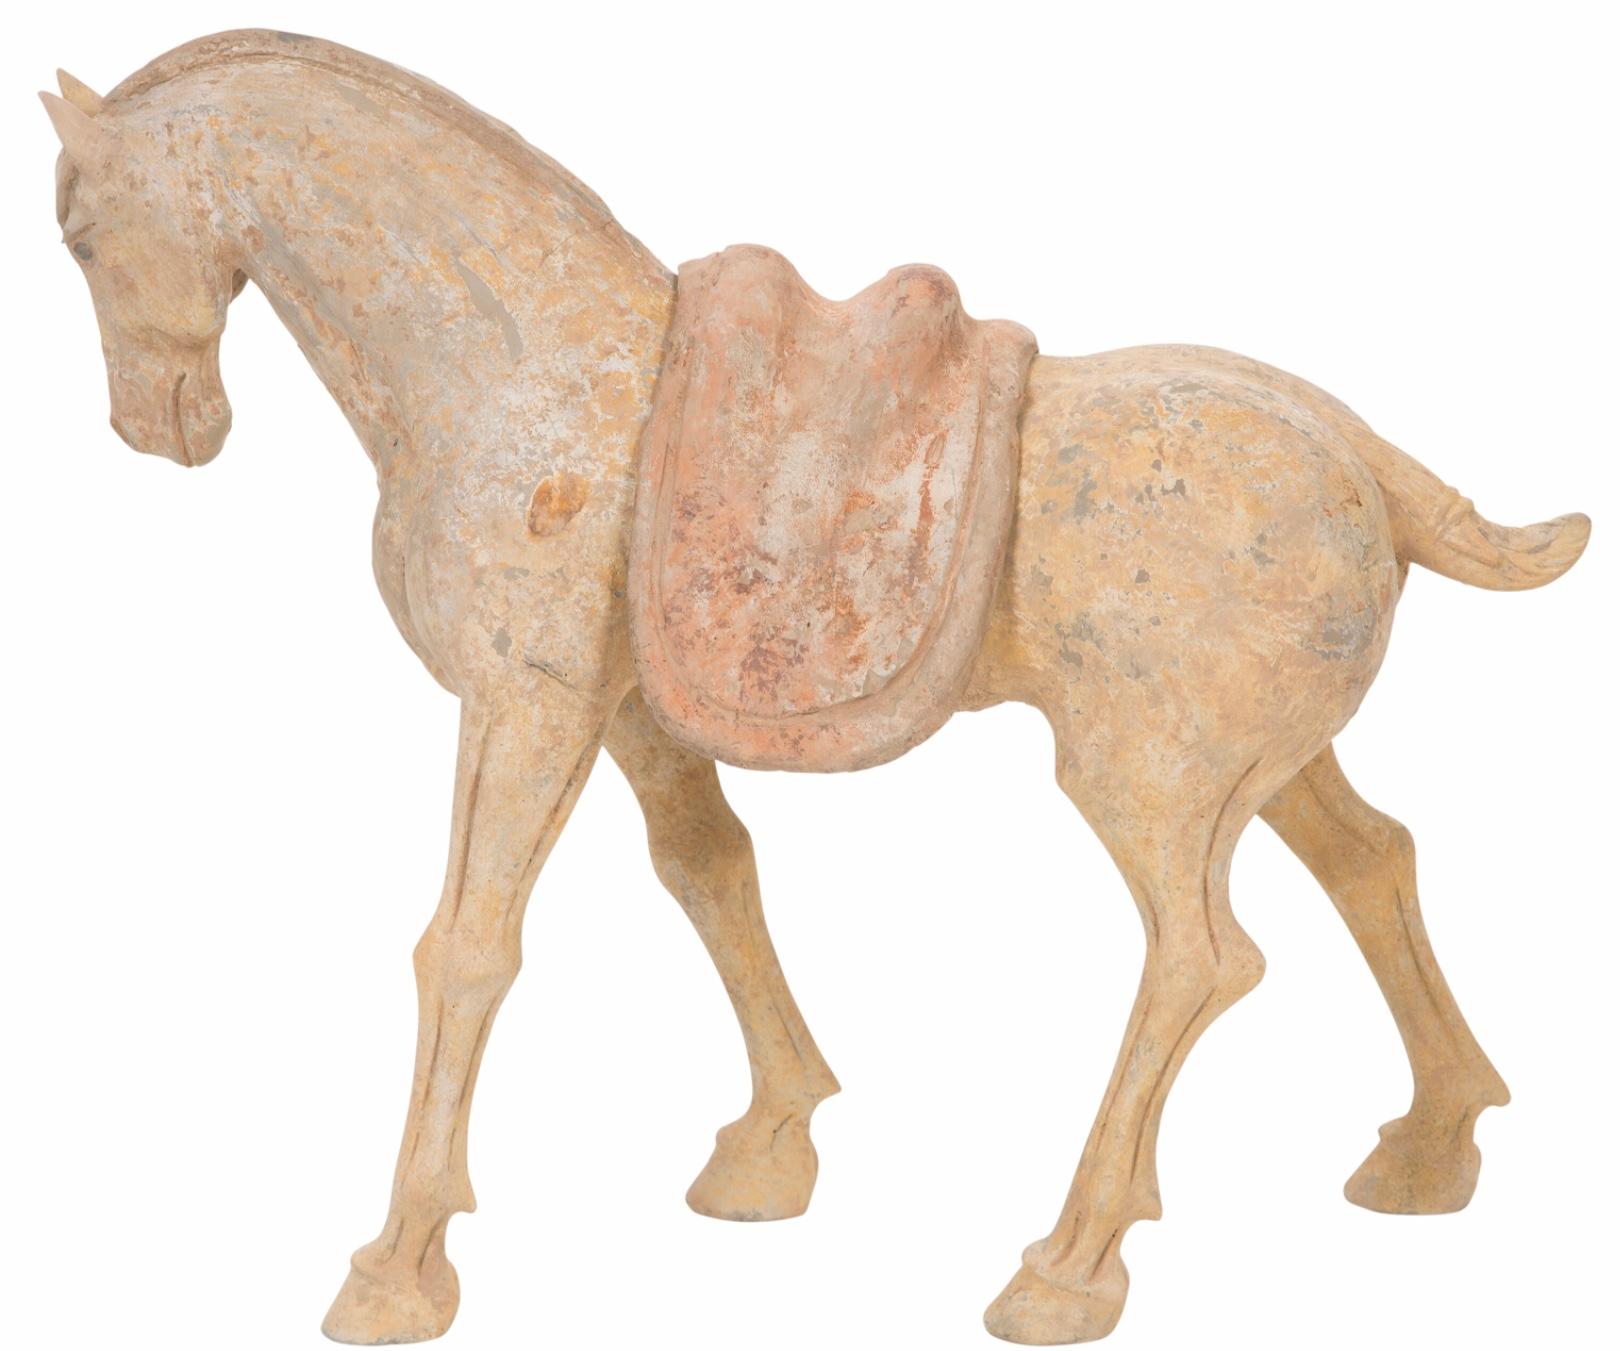 A Tang Dynasty (618 - 907AD) Chinese Pottery Horse with Saddle. No TL test but absolutely guaranteed authentic with COA available upon request.

Dimensions: 14 x 6.75 x 17 inches (35.6 x 20.3 x 43.2 cm)

Condition; Very Good with wear